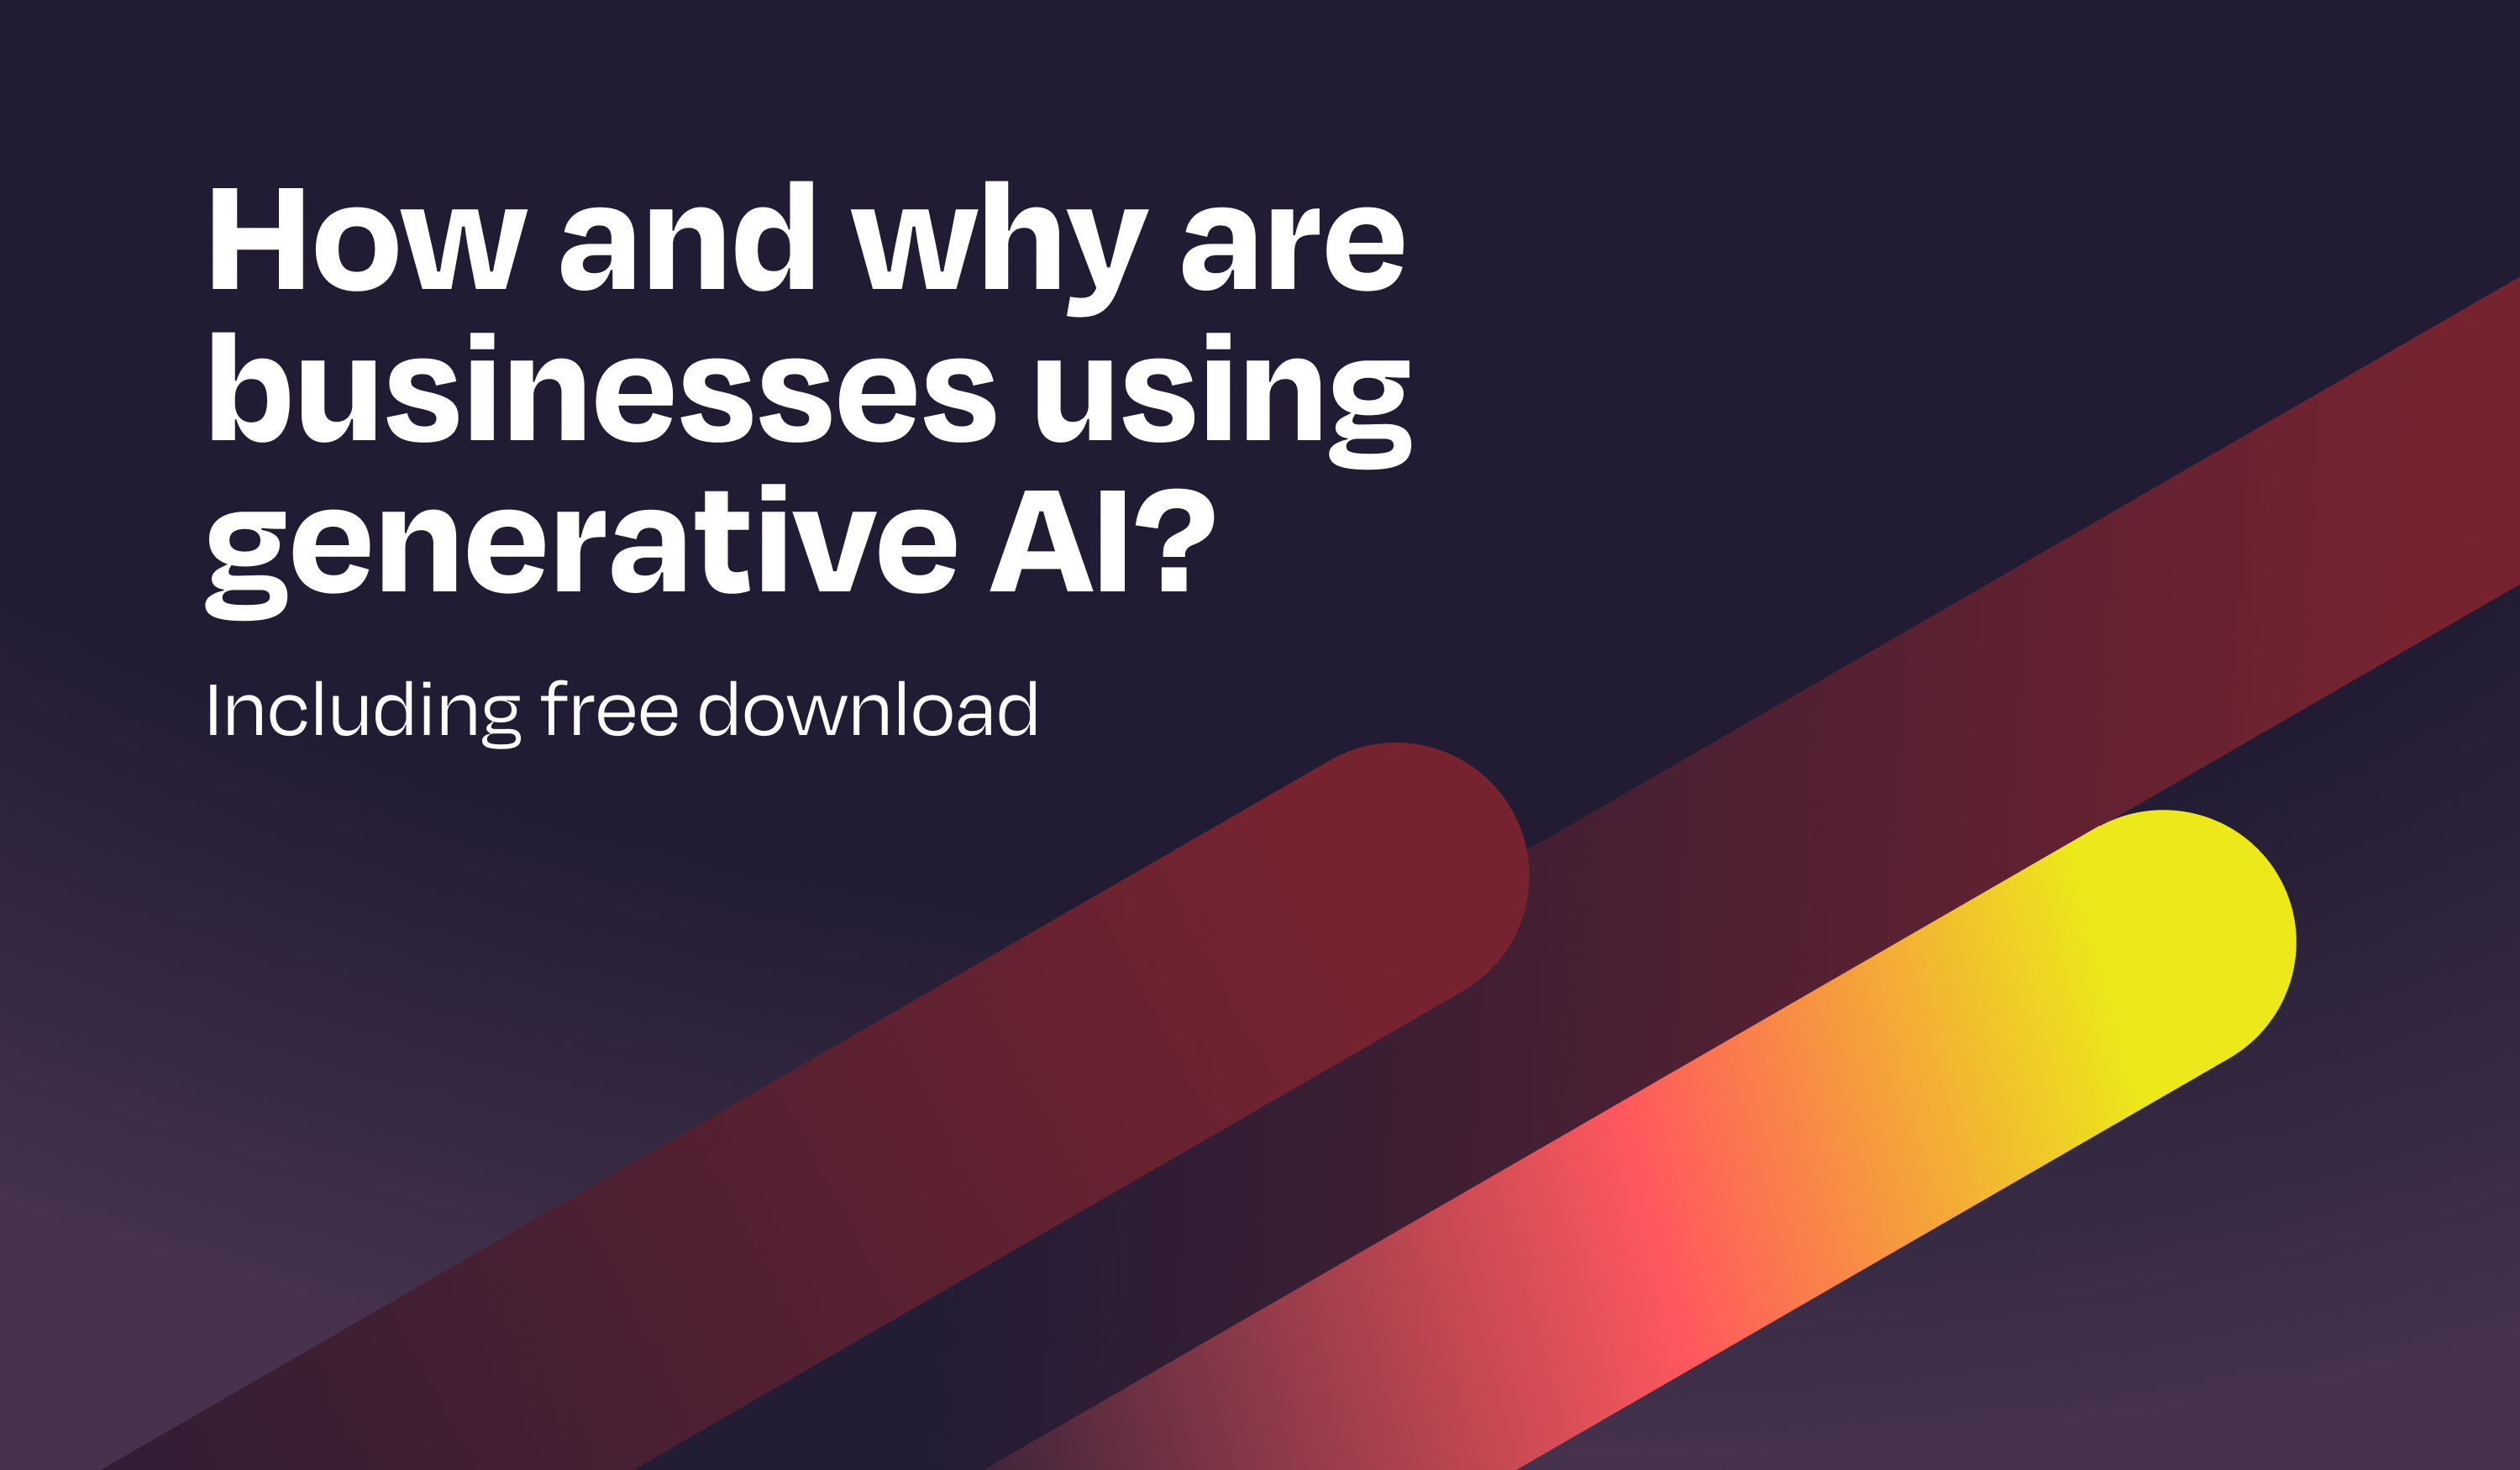 How and why are businesses using generative AI?